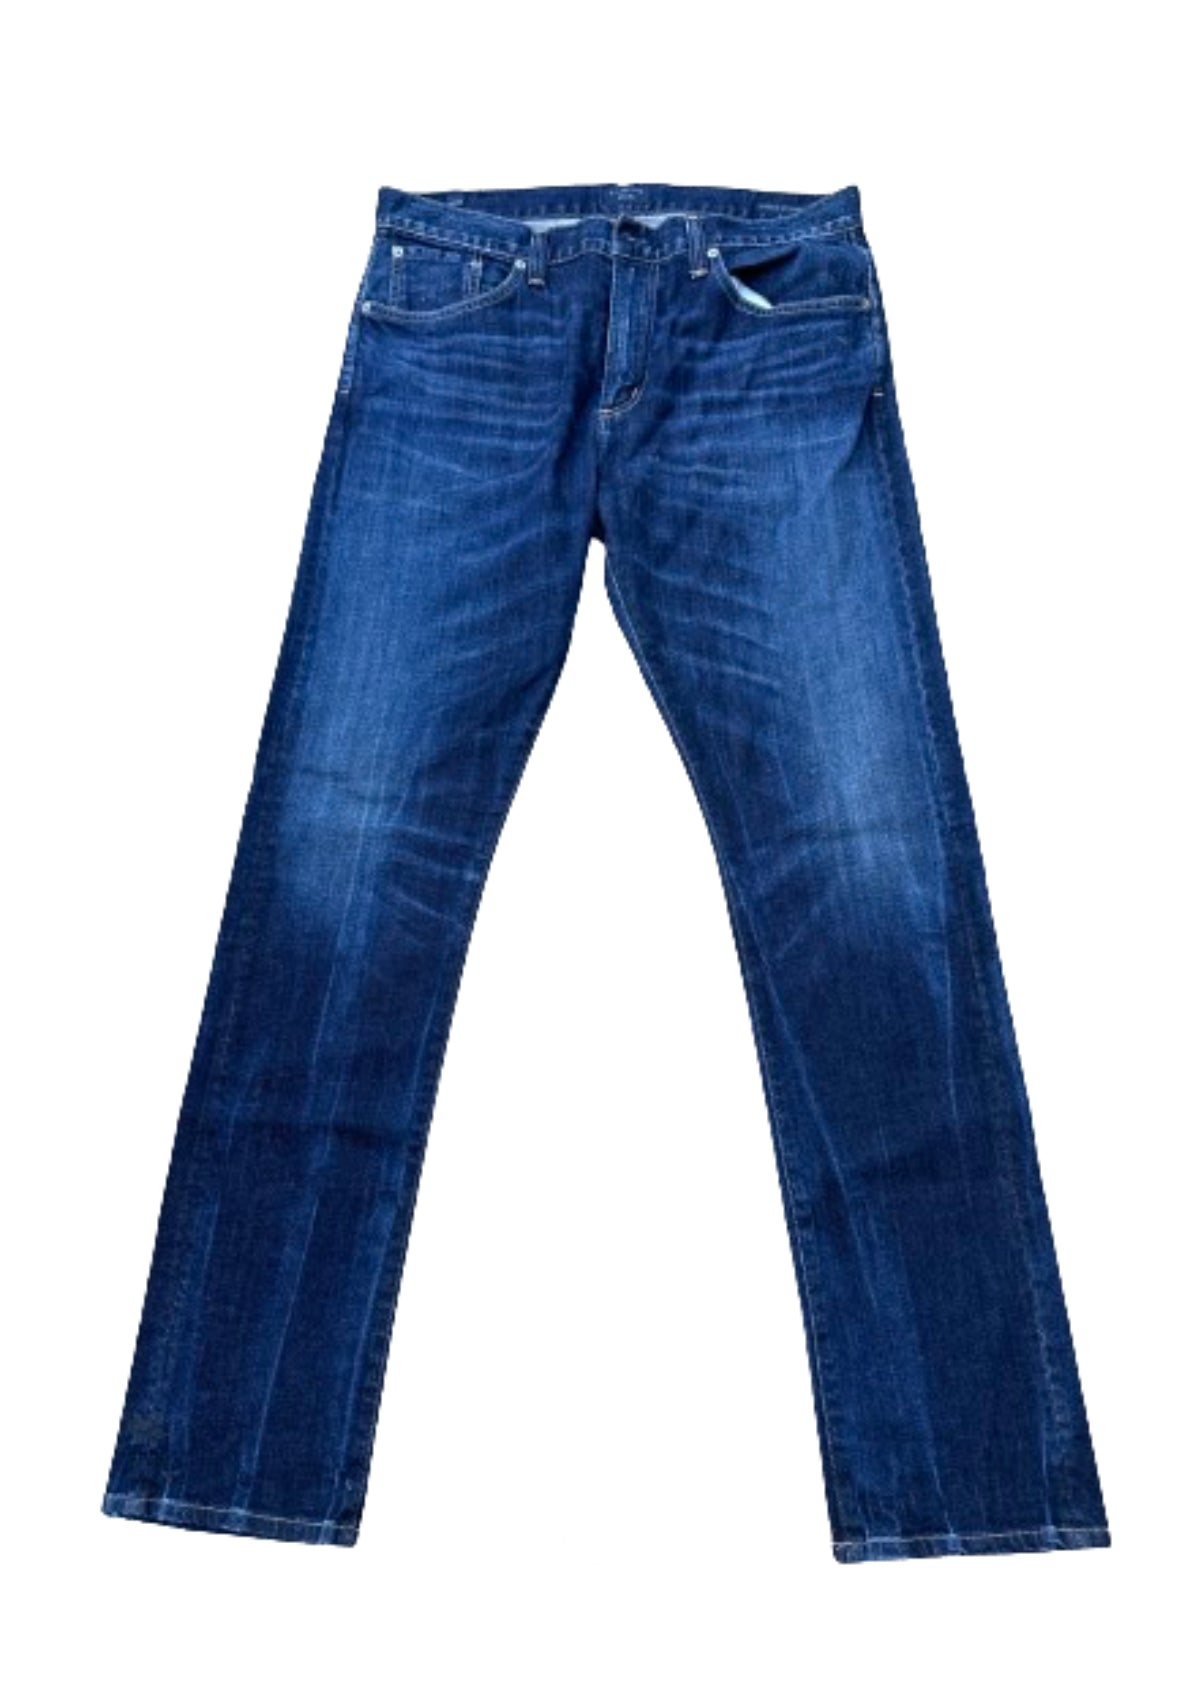 BONES: Agent Booth's Citizens-For-Humanity Blue Denim Jeans (34)